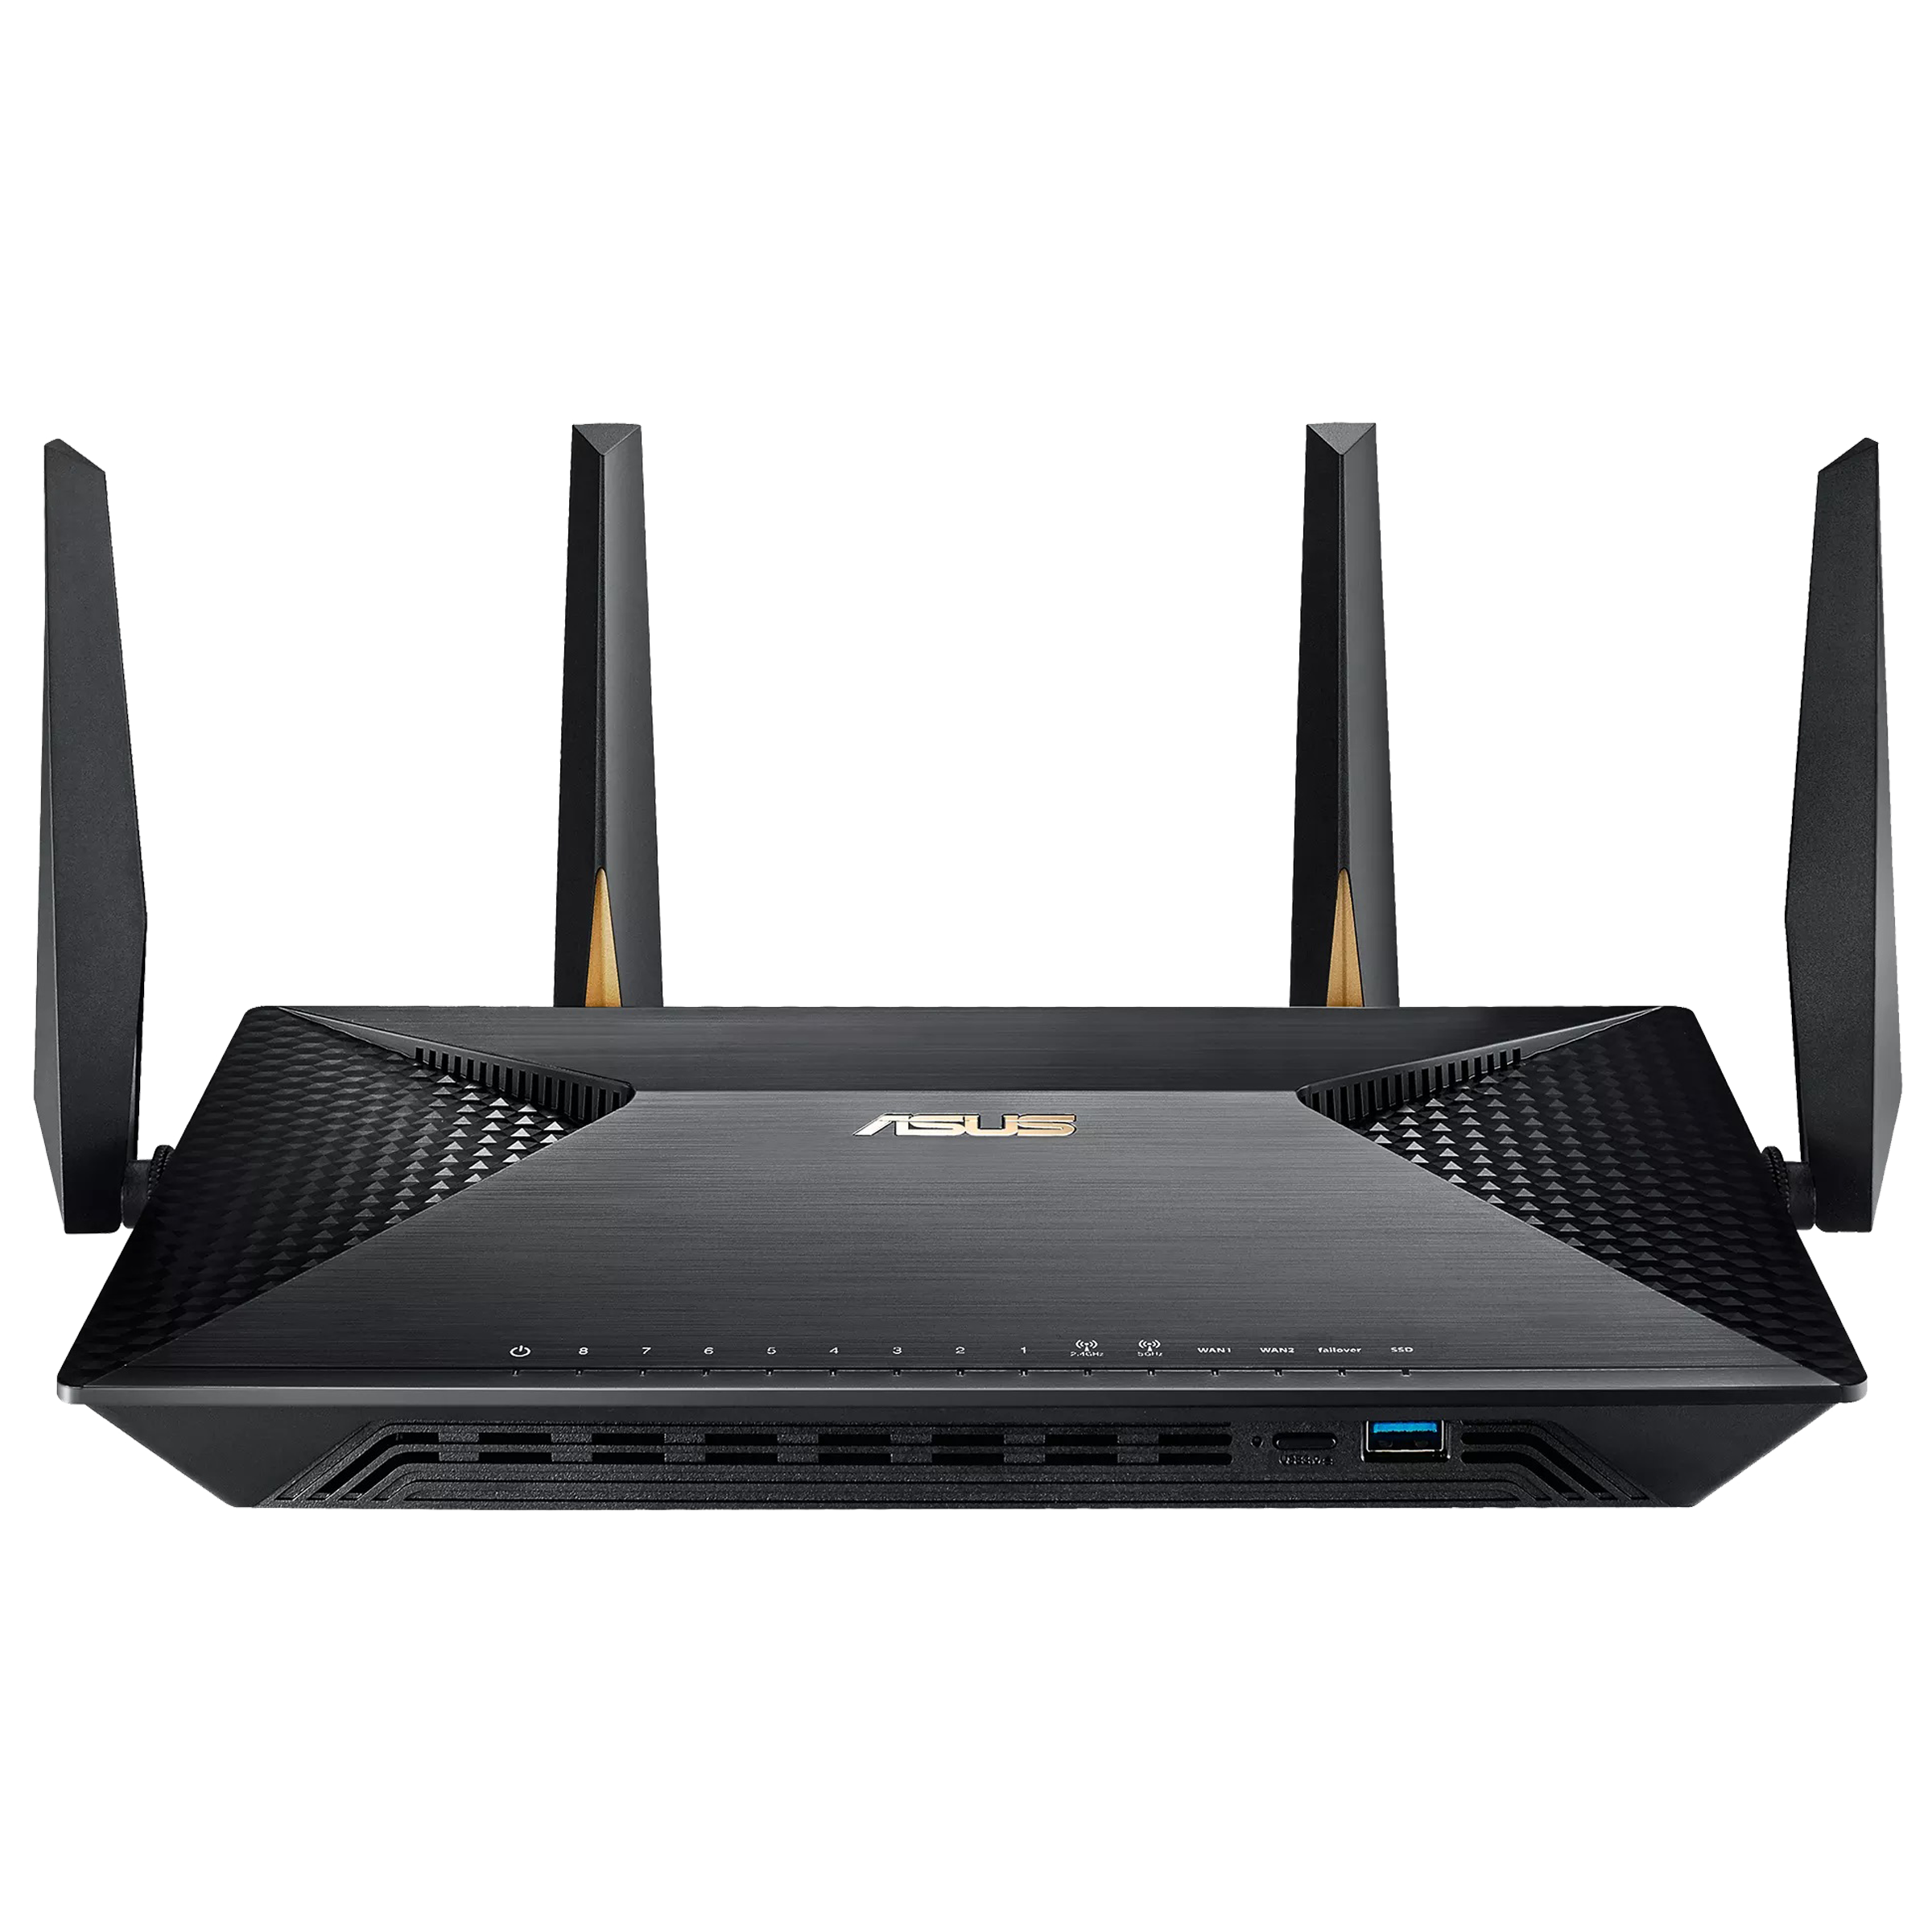 Asus BRT-AC828 Dual Band 2 Gbps Wi-Fi Router (4 Antennas, 8 LAN Ports, AiProtection Pro, Black)_1